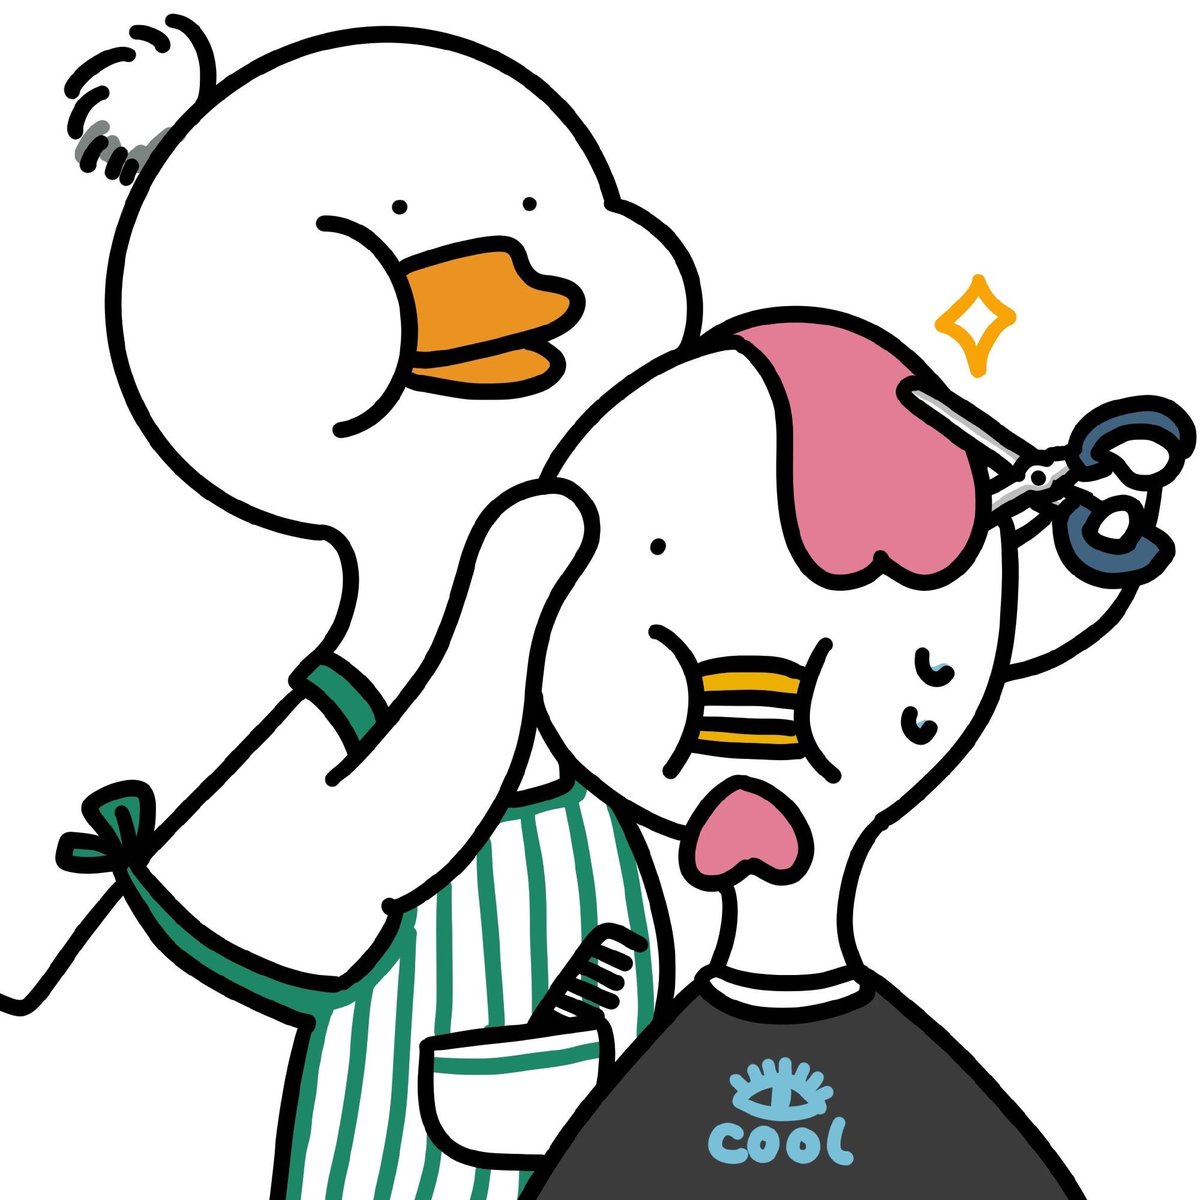 in real life it's quarantine time in china; they have a sleepover and buya tries his hand (wing) at giving boji a haircut  (february 2020)